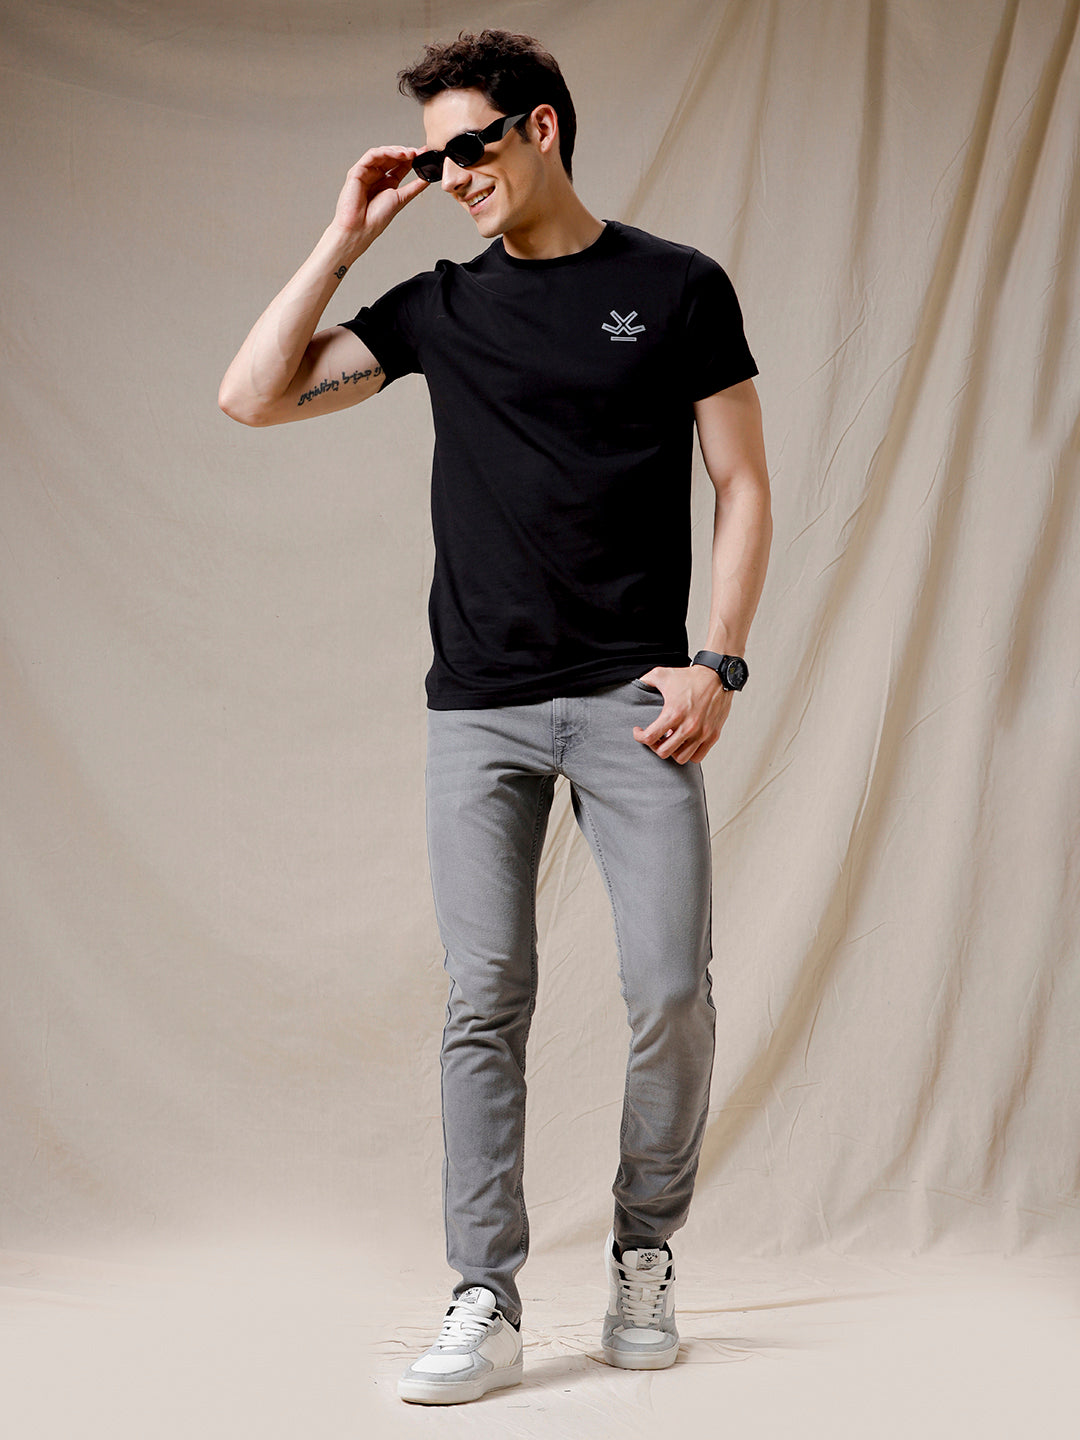 Faded Skinny Fit Grey Jeans